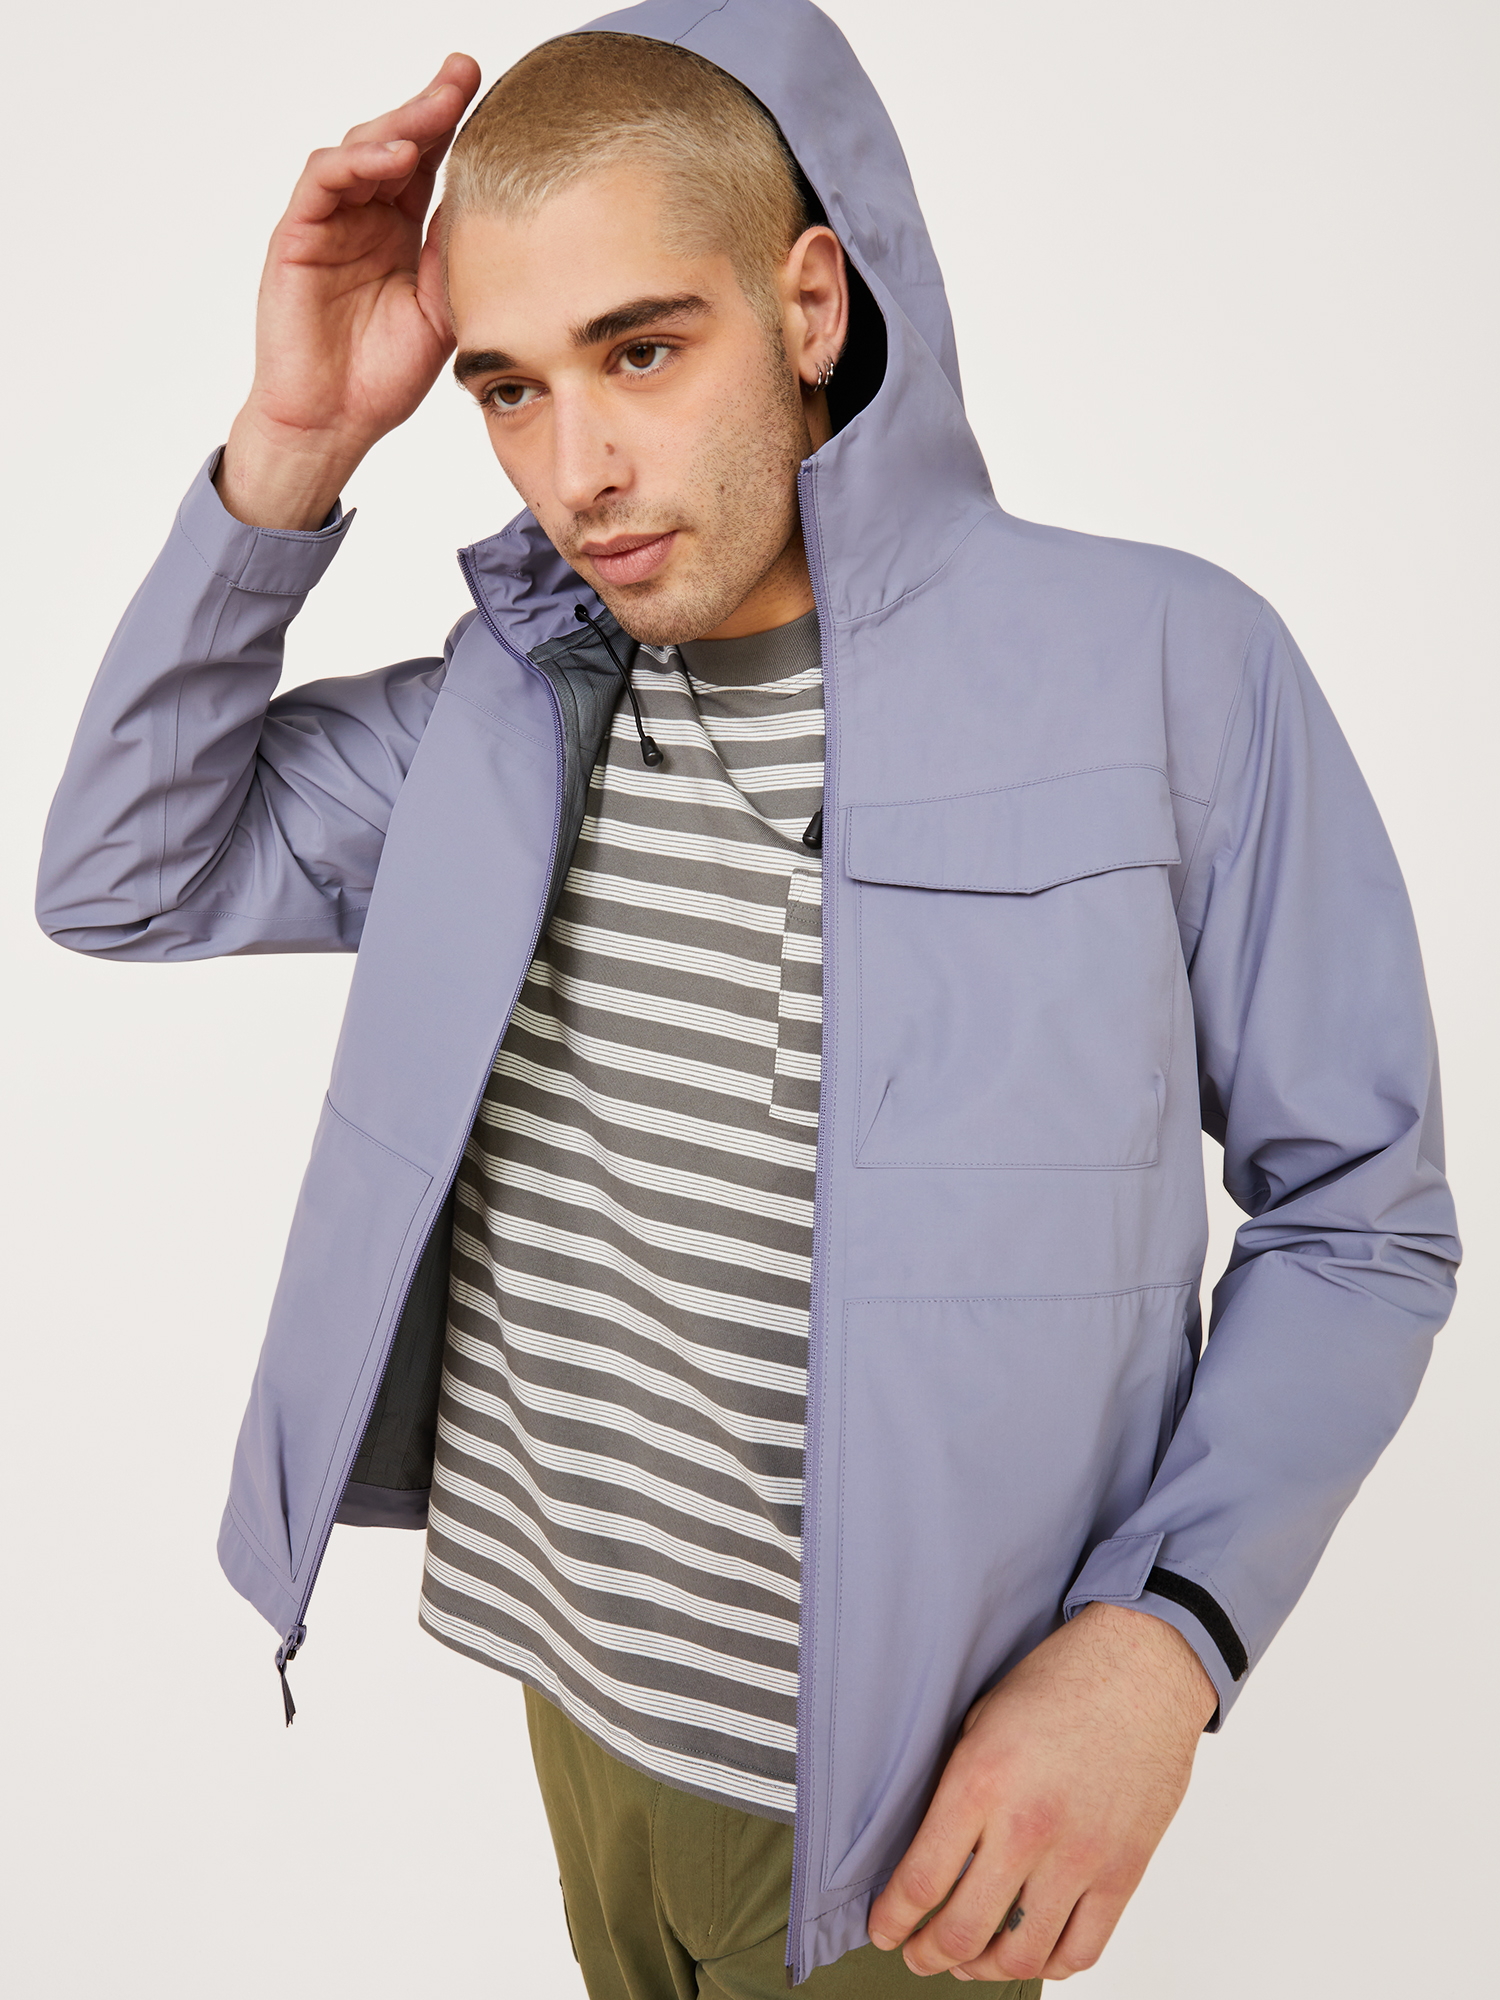 Free Assembly Men's Waterproof Shell Jacket - image 1 of 6